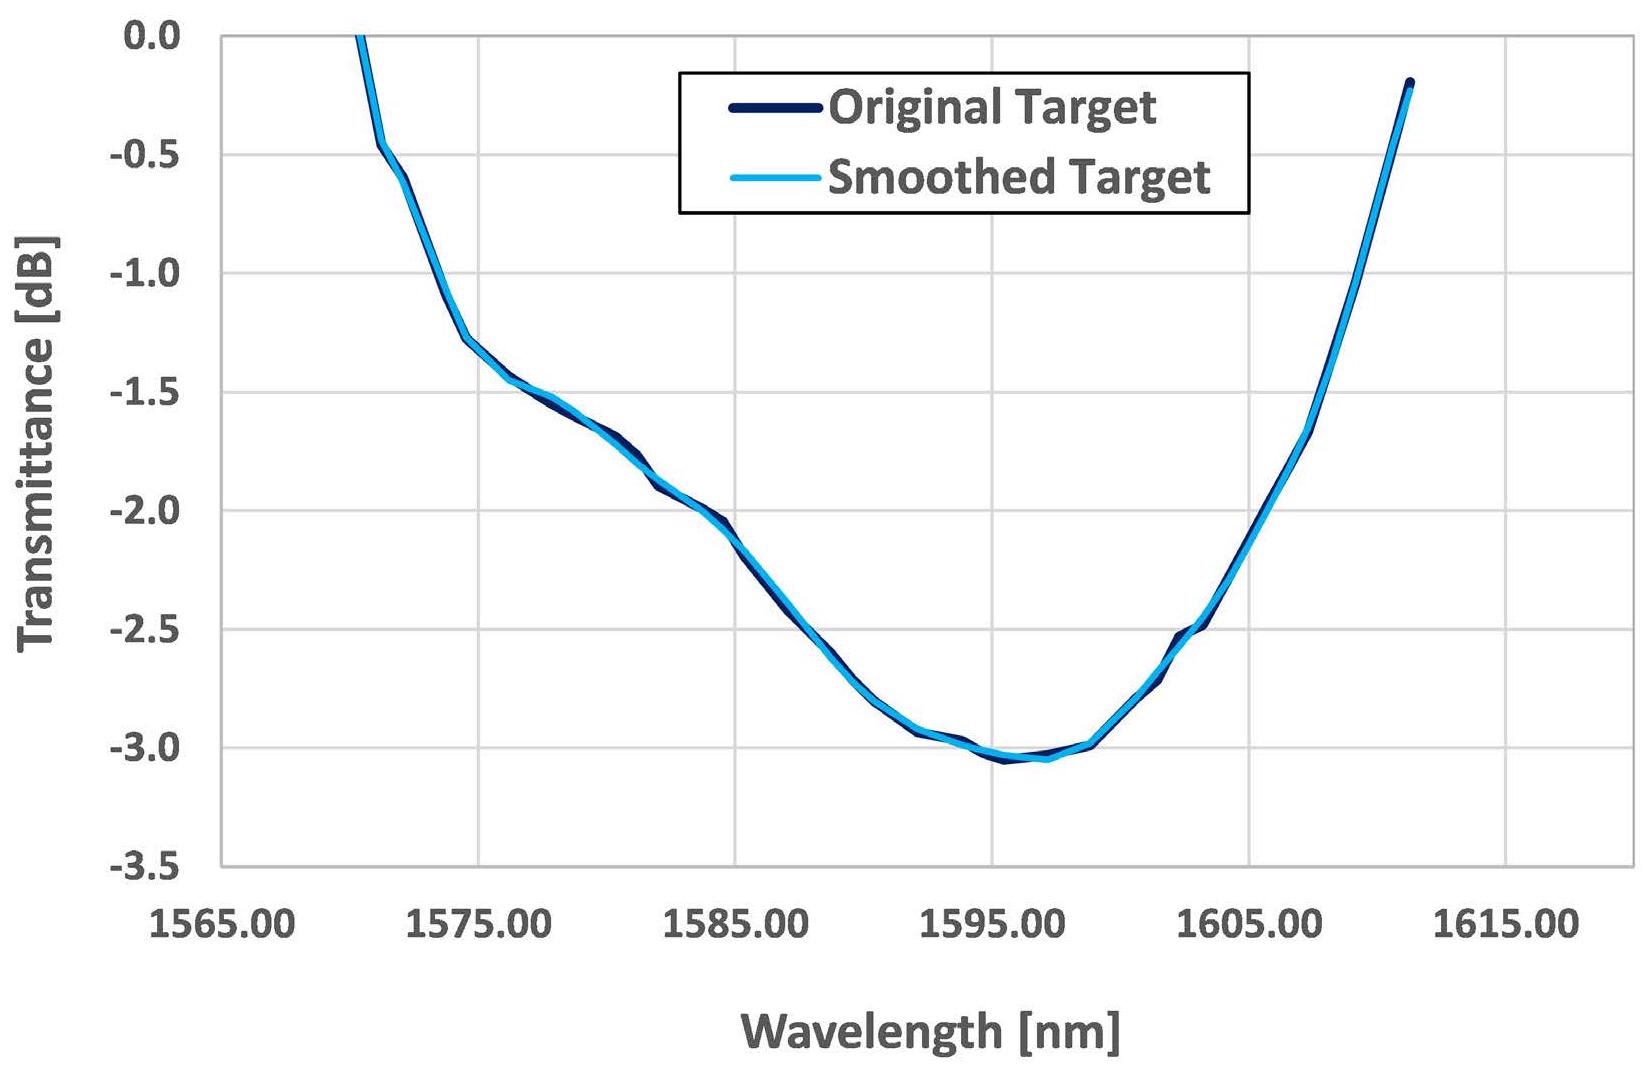 Example of applying smoothed fitting curve in simulation to correct an original target curve measured from EDFA with system noise.